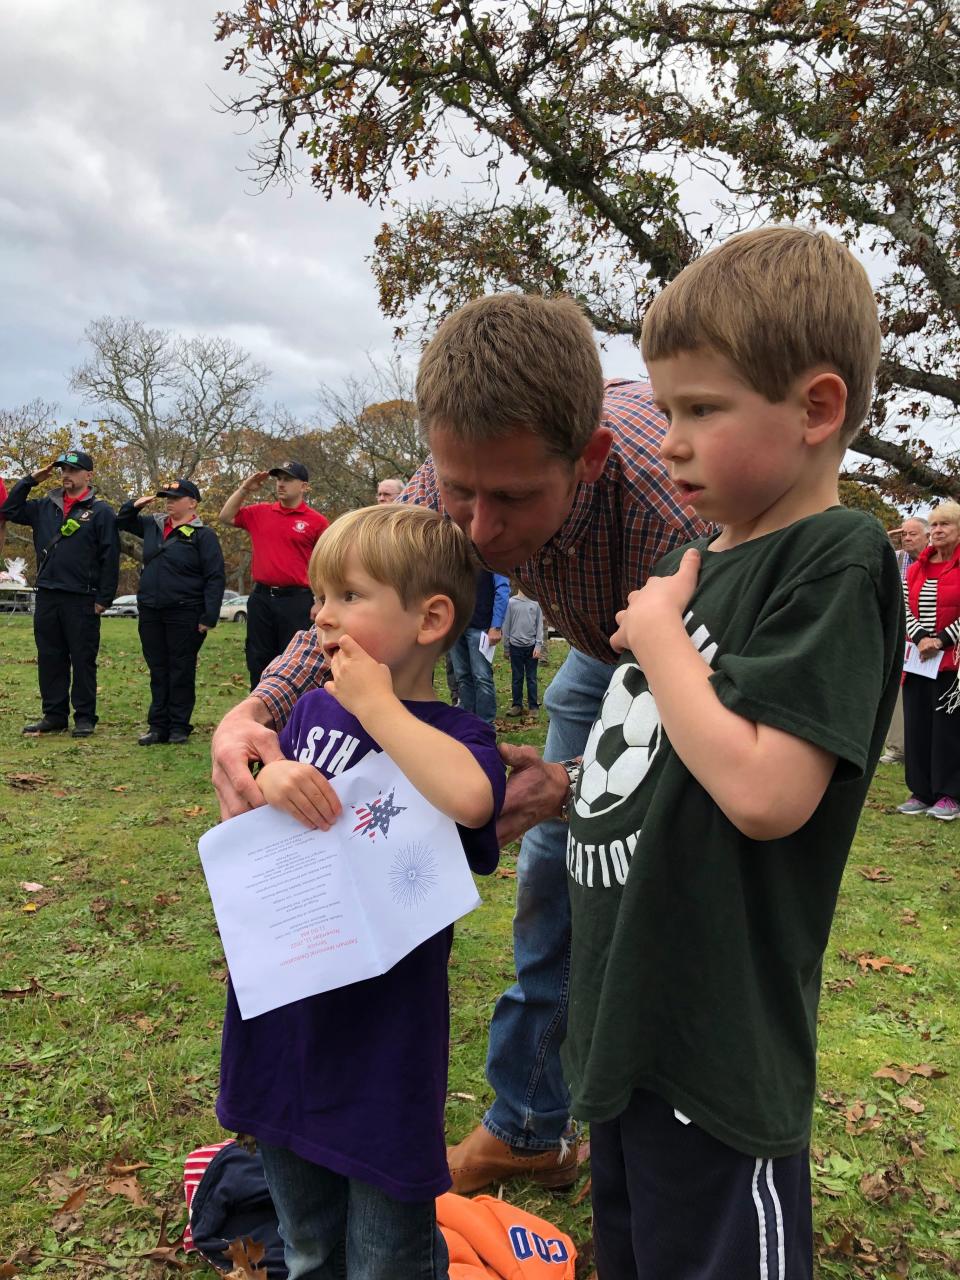 Eastham resident Ben Greene attended the Veterans Day ceremony in Eastham with his sons Dawson and Caleb.
(Photo: Denise Coffey/Cape Cod Times)